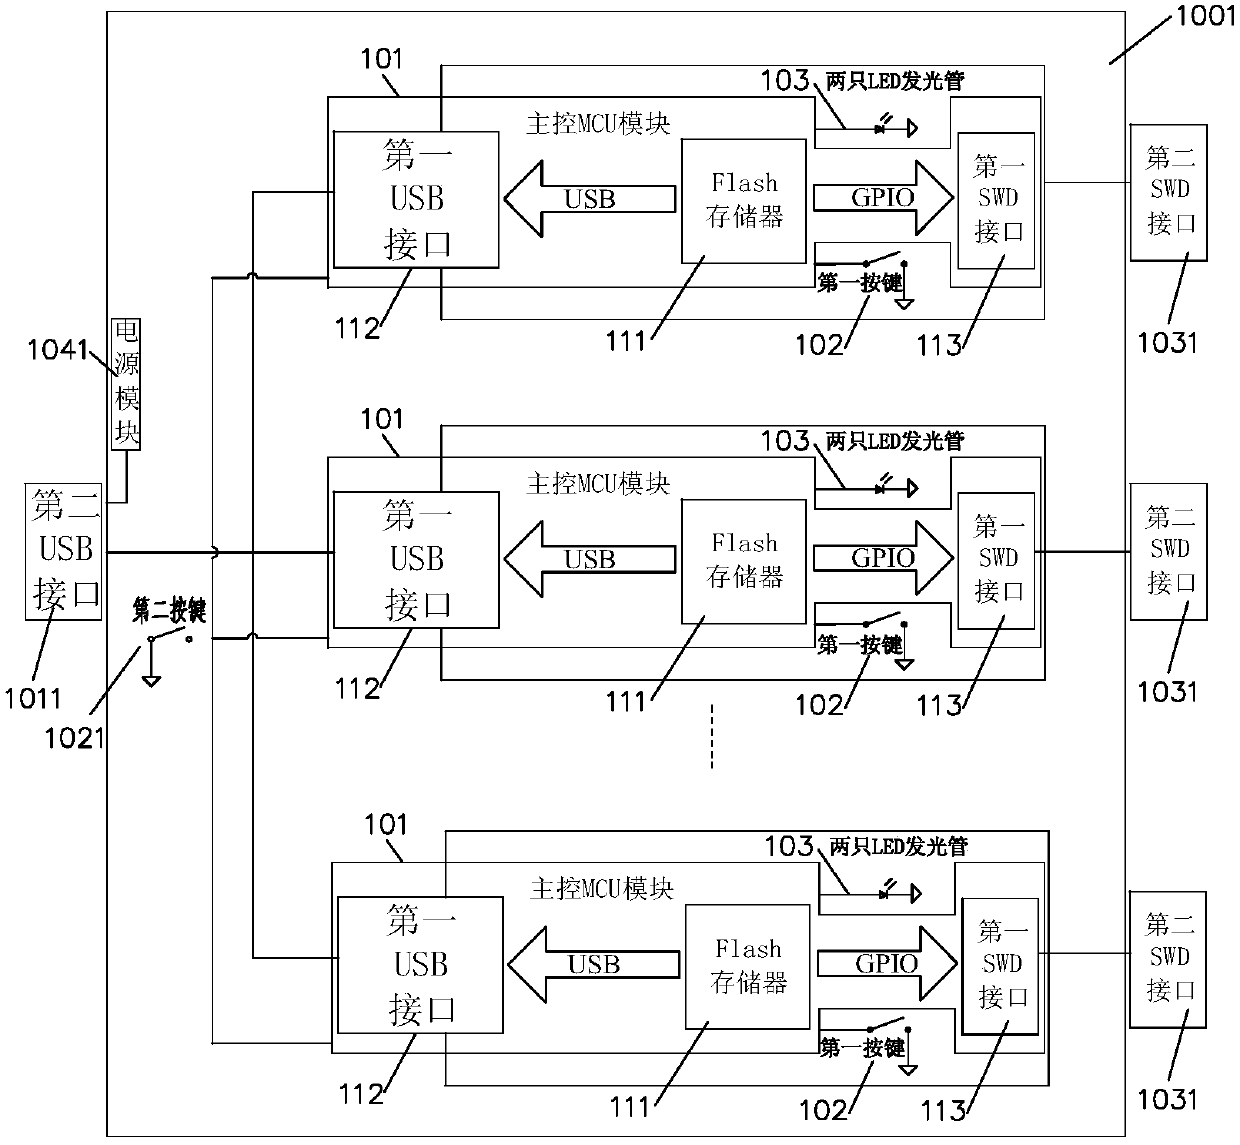 A scalable modular multi-channel off-line programmer